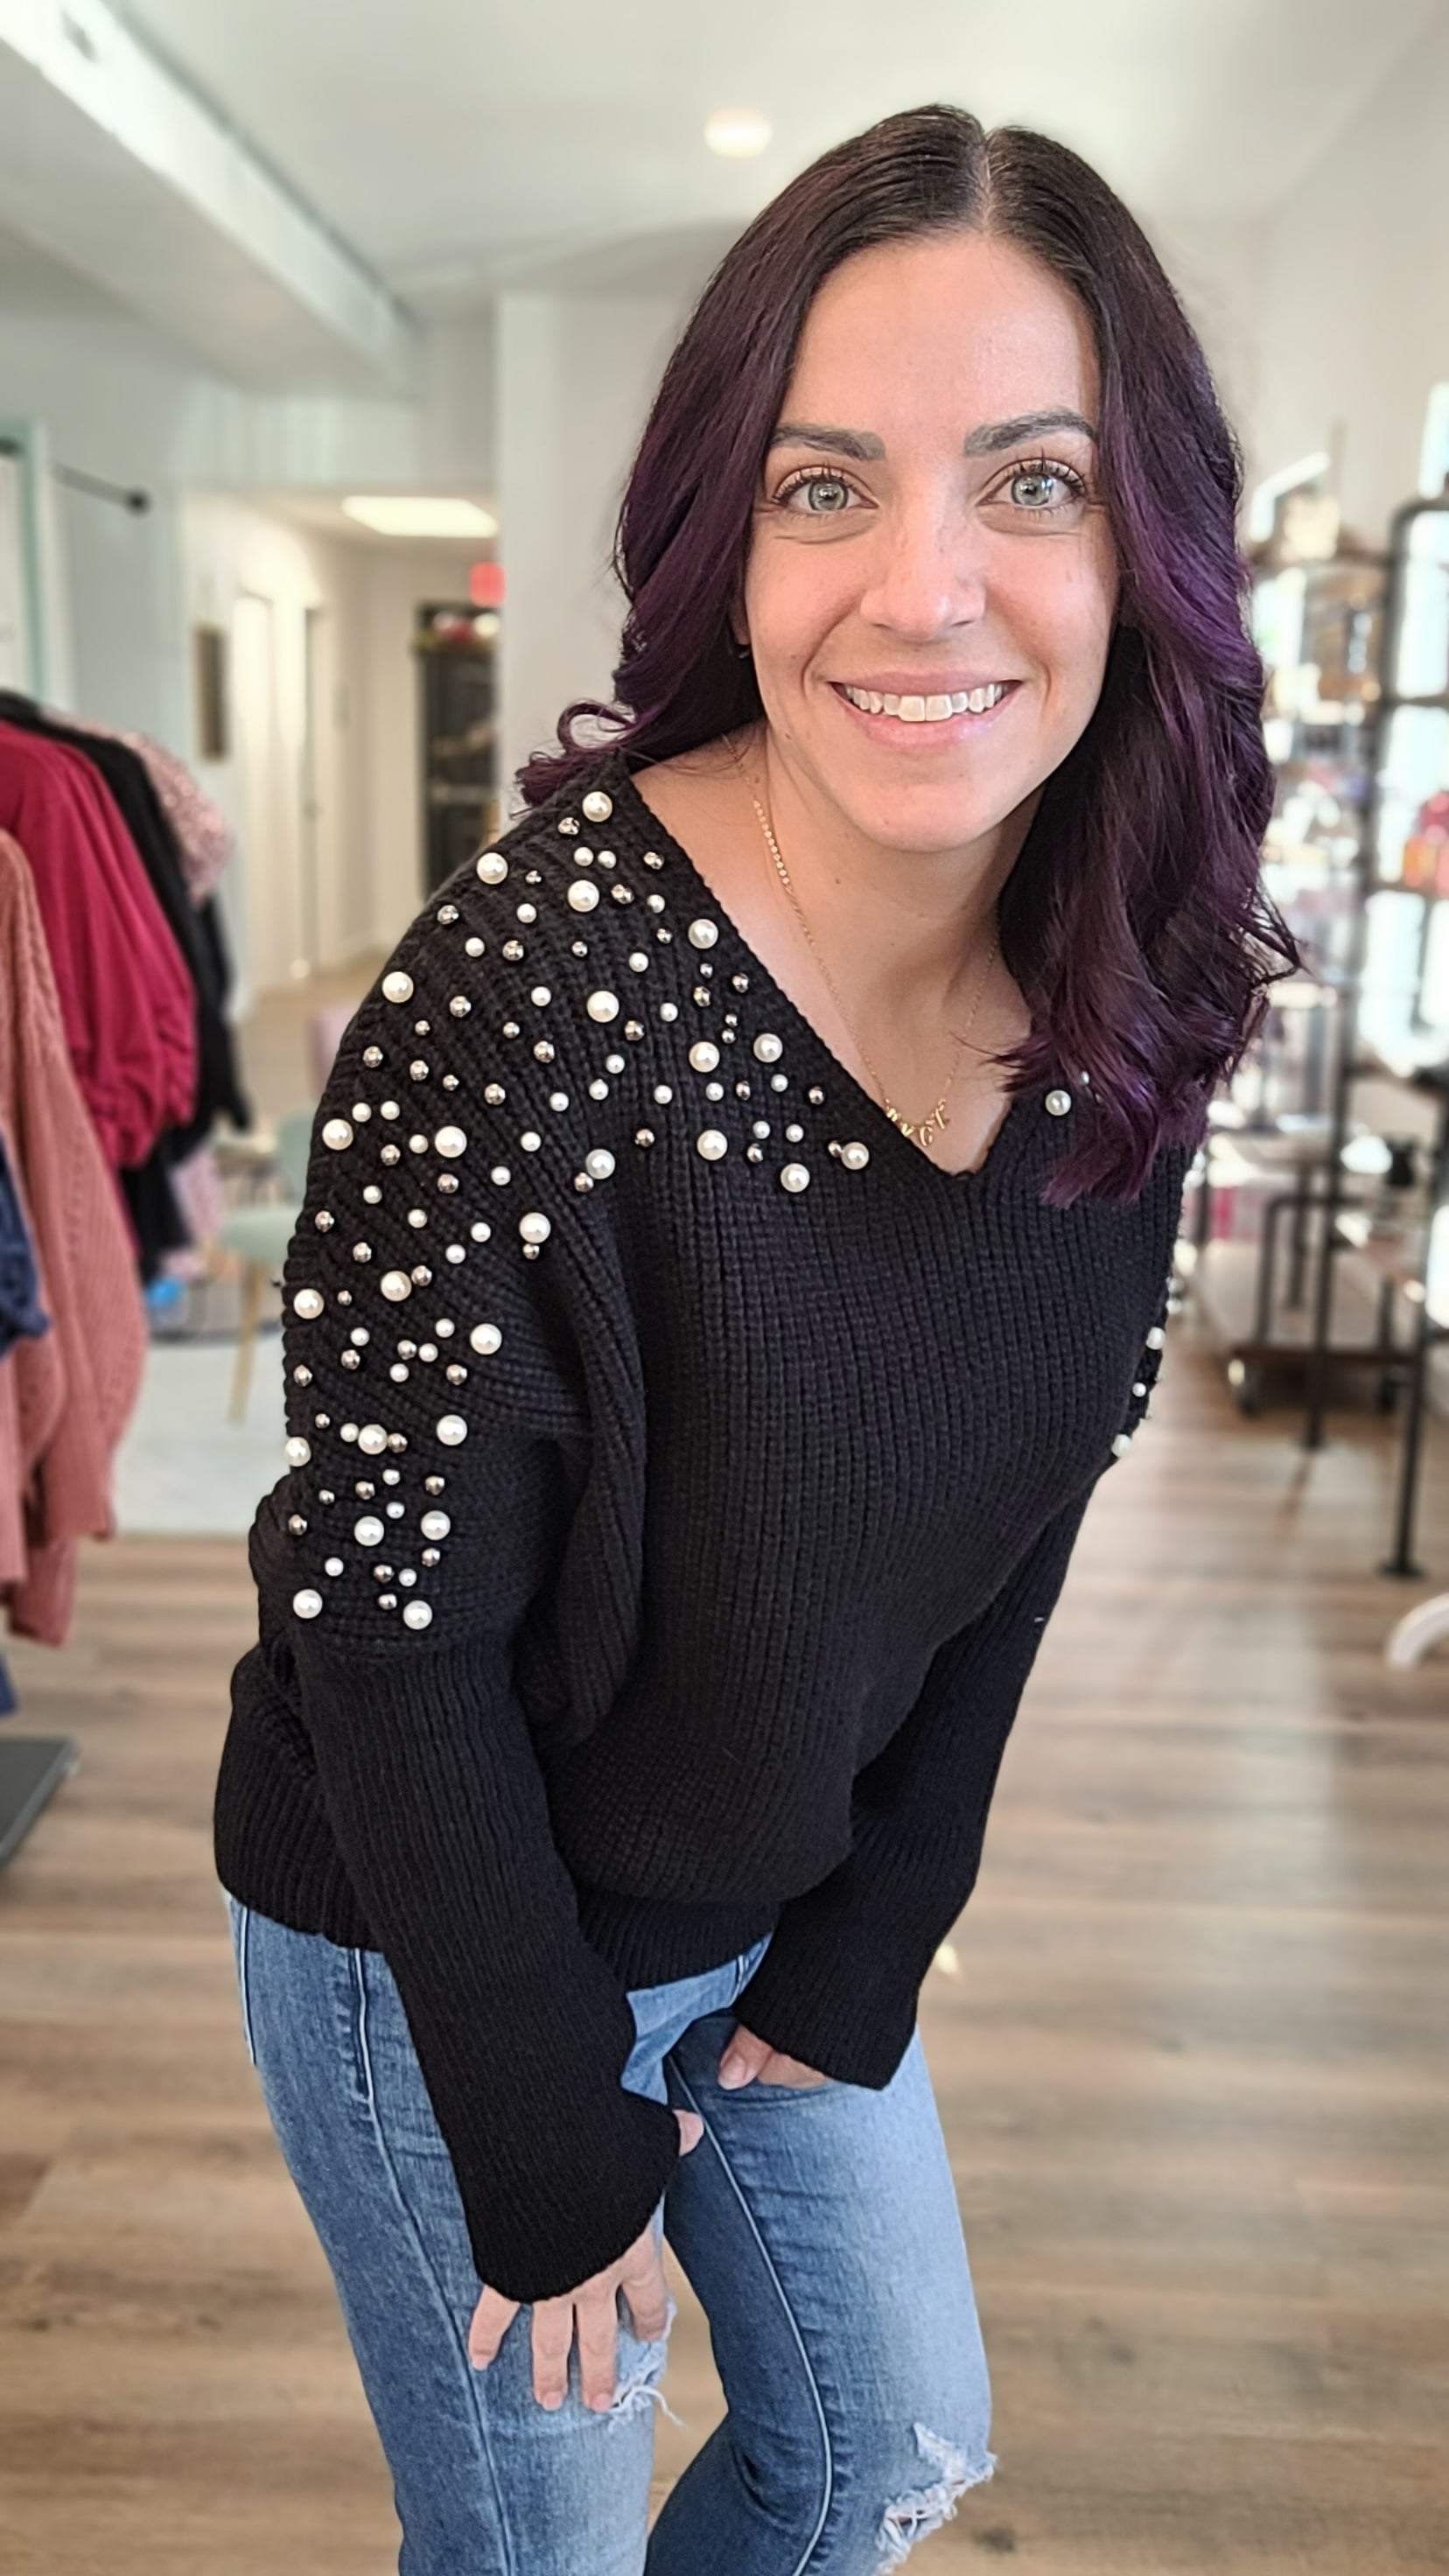 Shop Estelle Pearl Sweater-Sweater at Ruby Joy Boutique, a Women's Clothing Store in Pickerington, Ohio